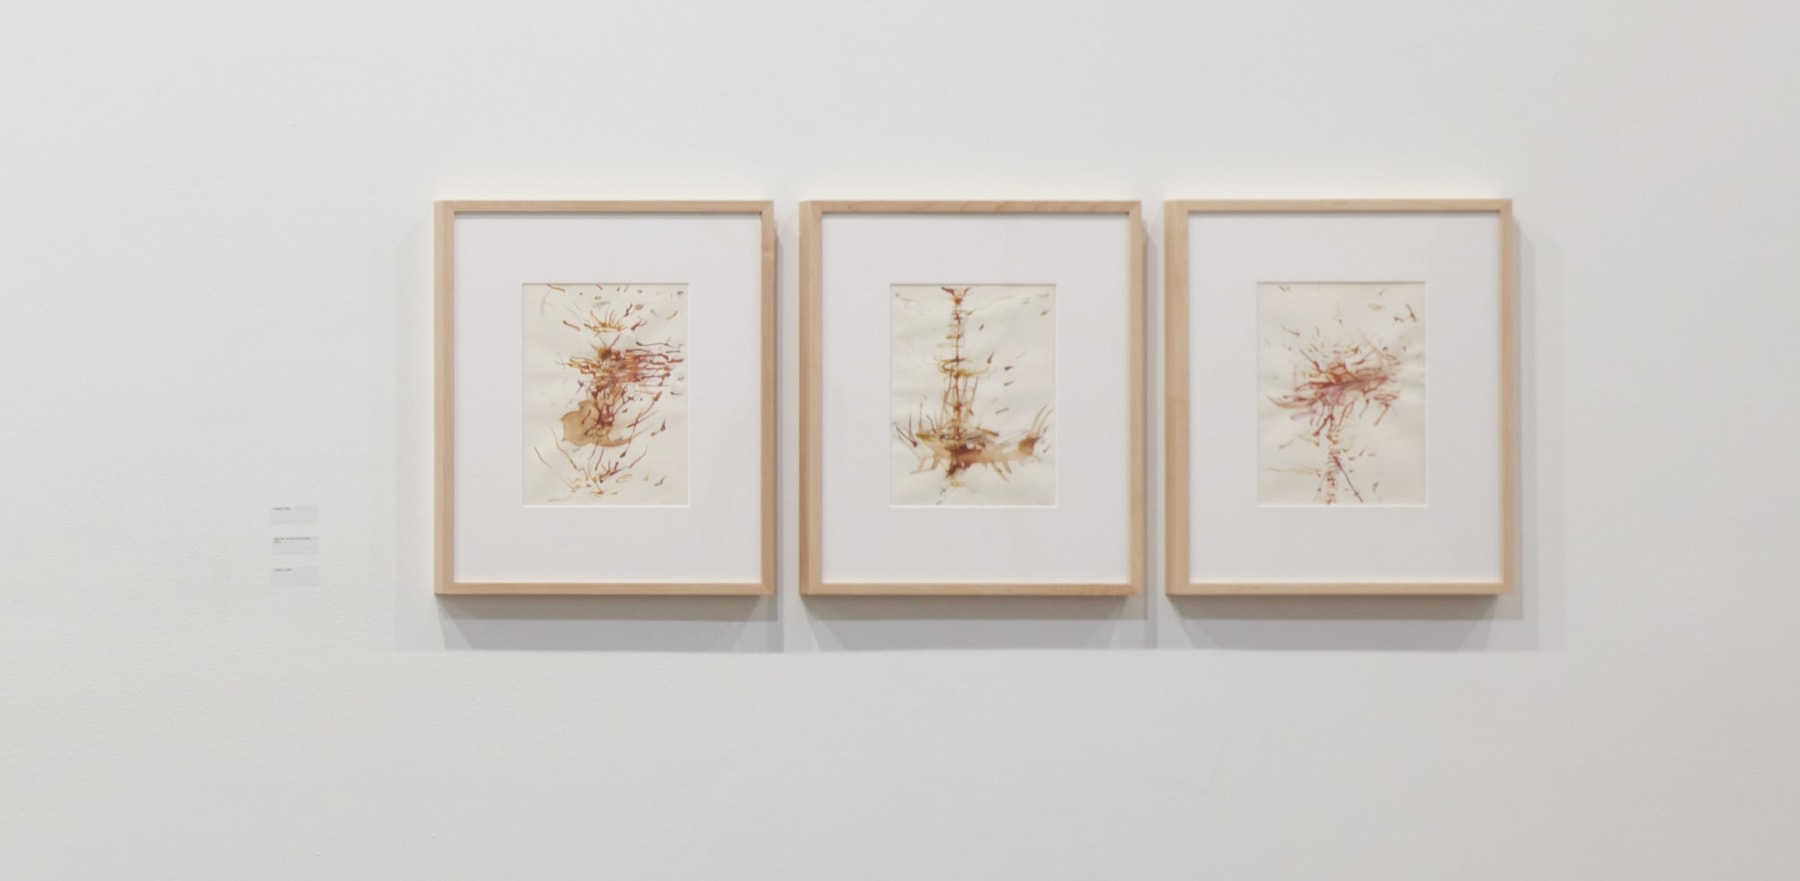 Rebecca Horn - Labyrinth of the Soul: Drawings 1965-2015 - Exhibitions - Sean Kelly Gallery